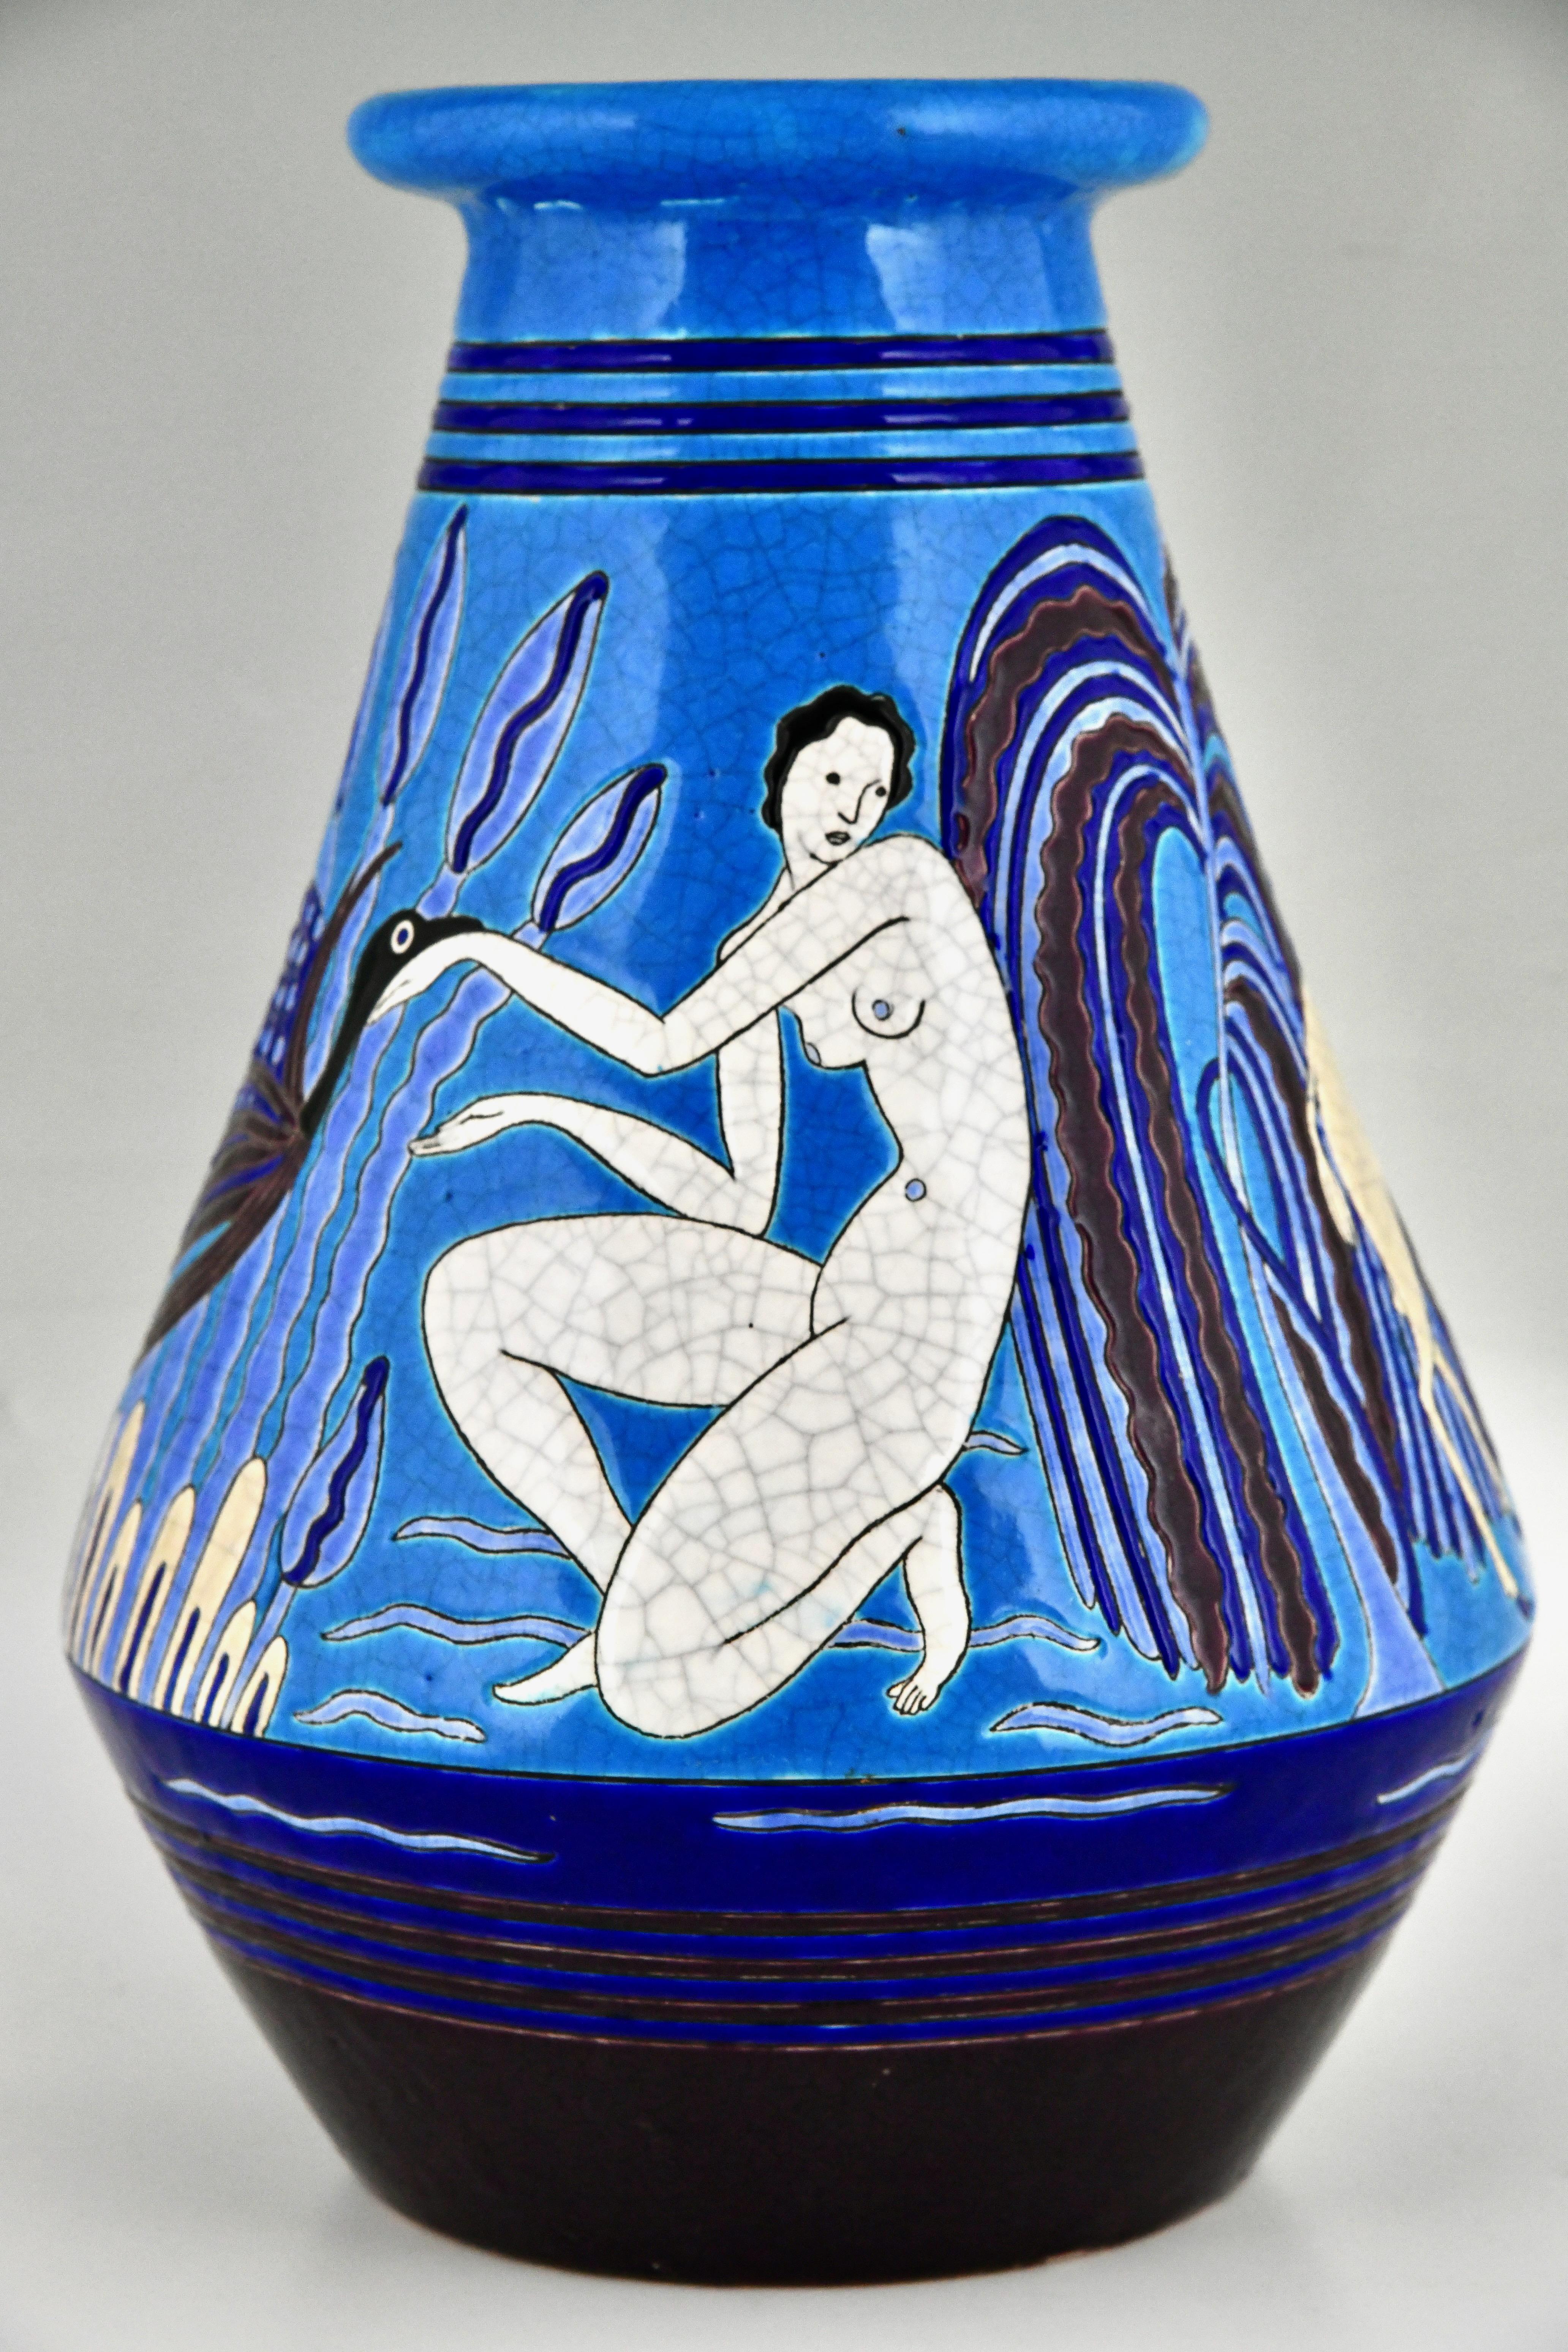 Art Deco vase with bathing nudes, peacock and ibex in shades of blue, purple, black and white. Aux Baigneuses. 
Marked Primavera, Longwy, France 1925. 
This French Art Deco vase was made by Longwy for Atelier Primavera, the design studio of the